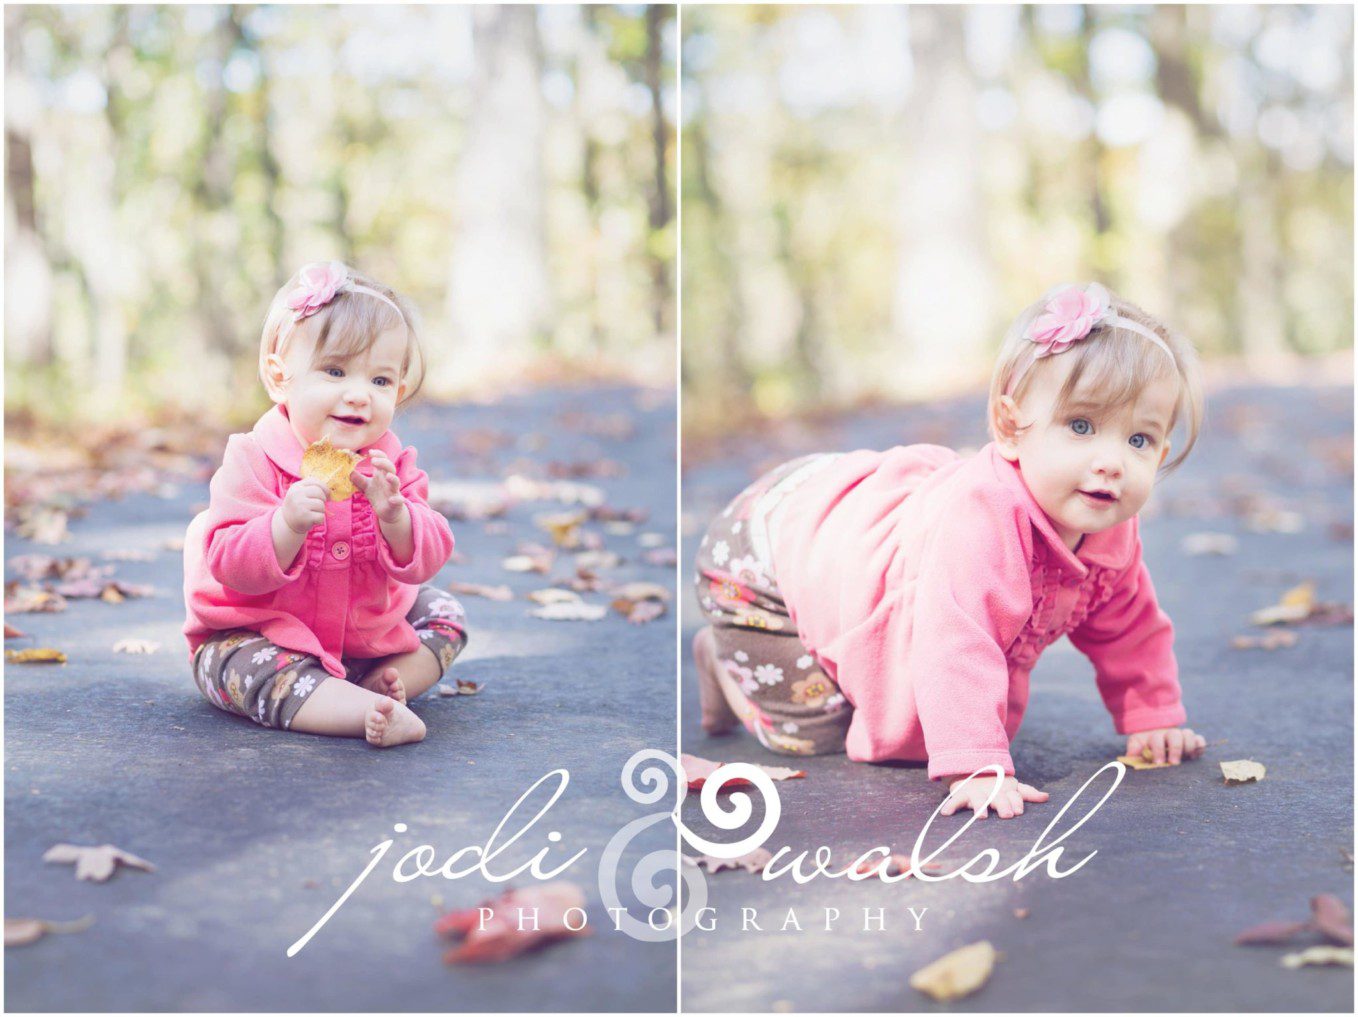 baby girl crawling on a paved path covered with leaves